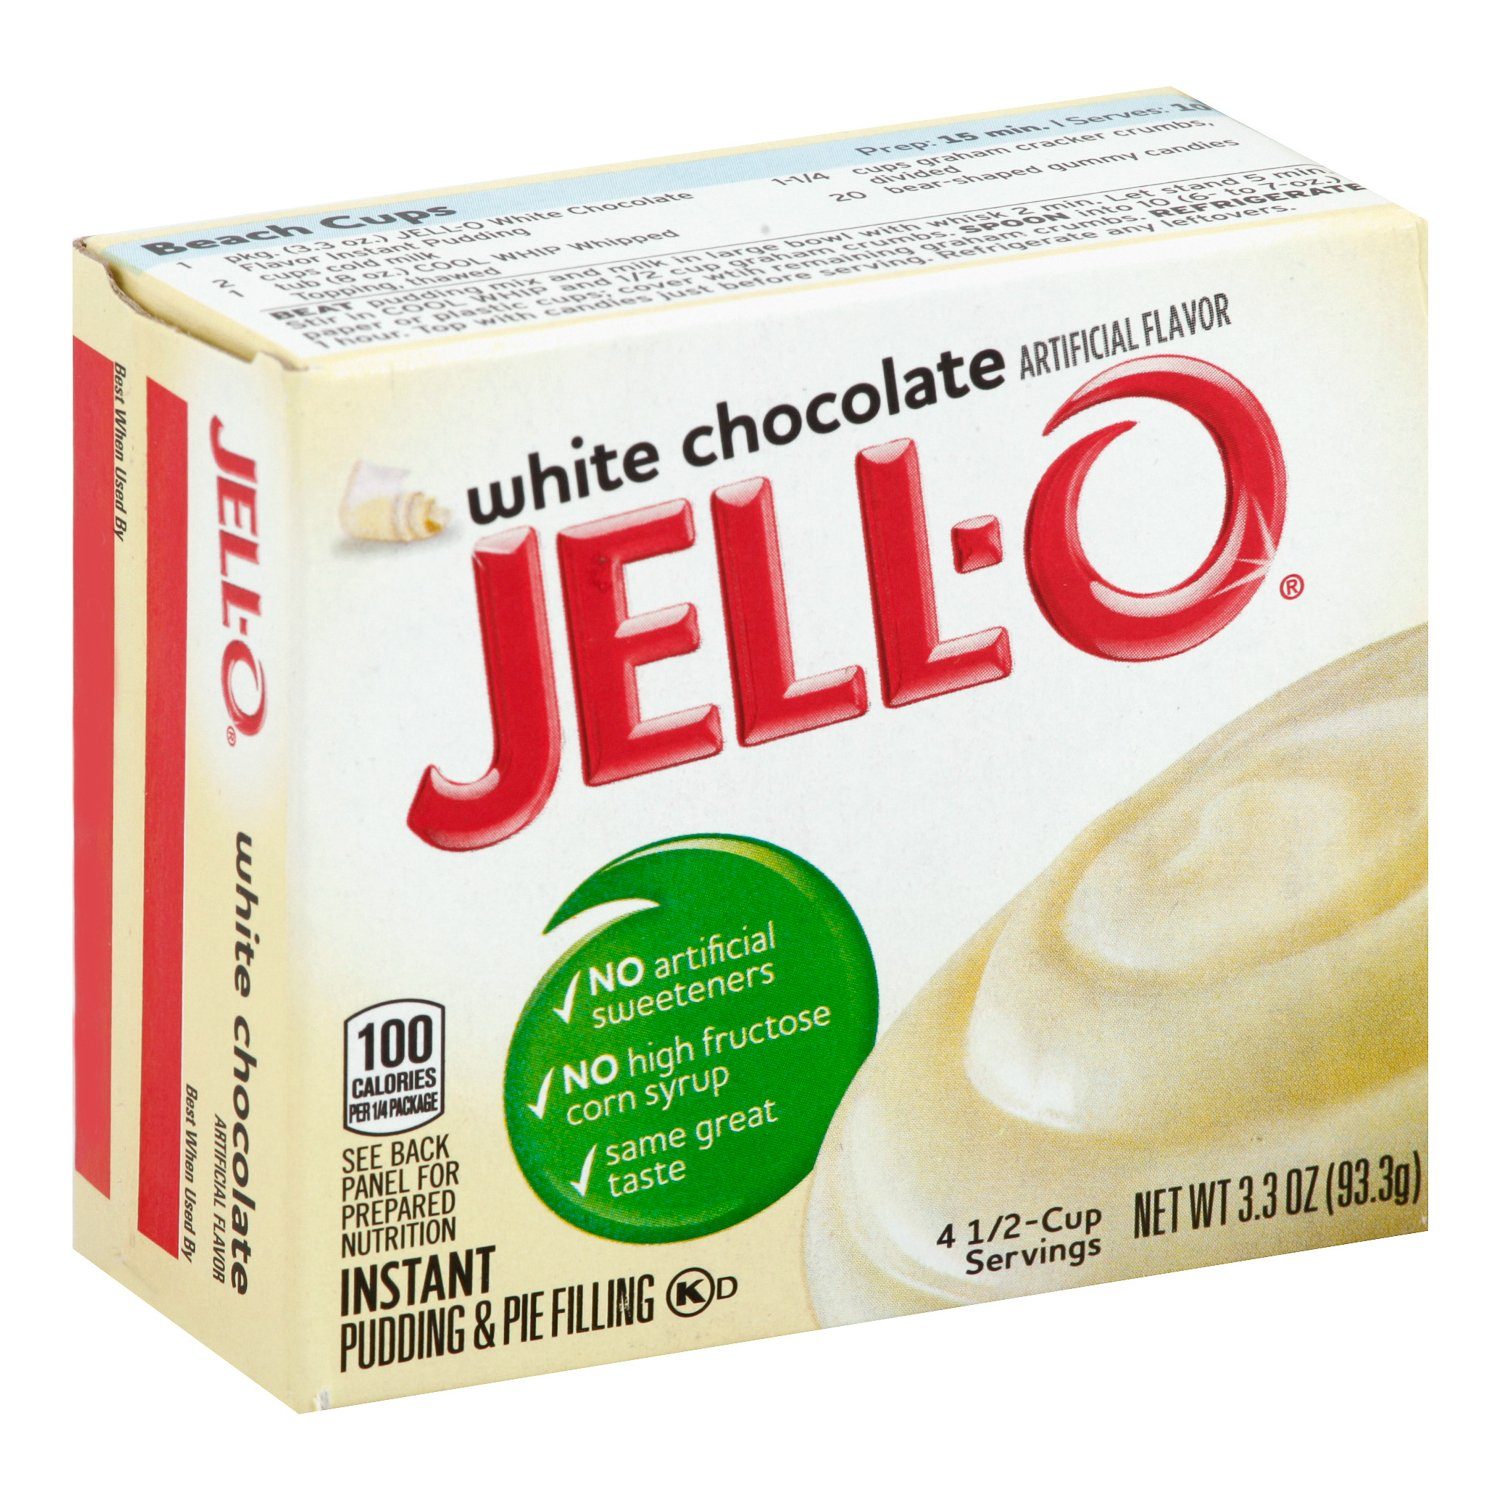 Jell-O Instant Pudding & Pie Filling Mixes Jell-O White Chocolate 3.3 Ounce 